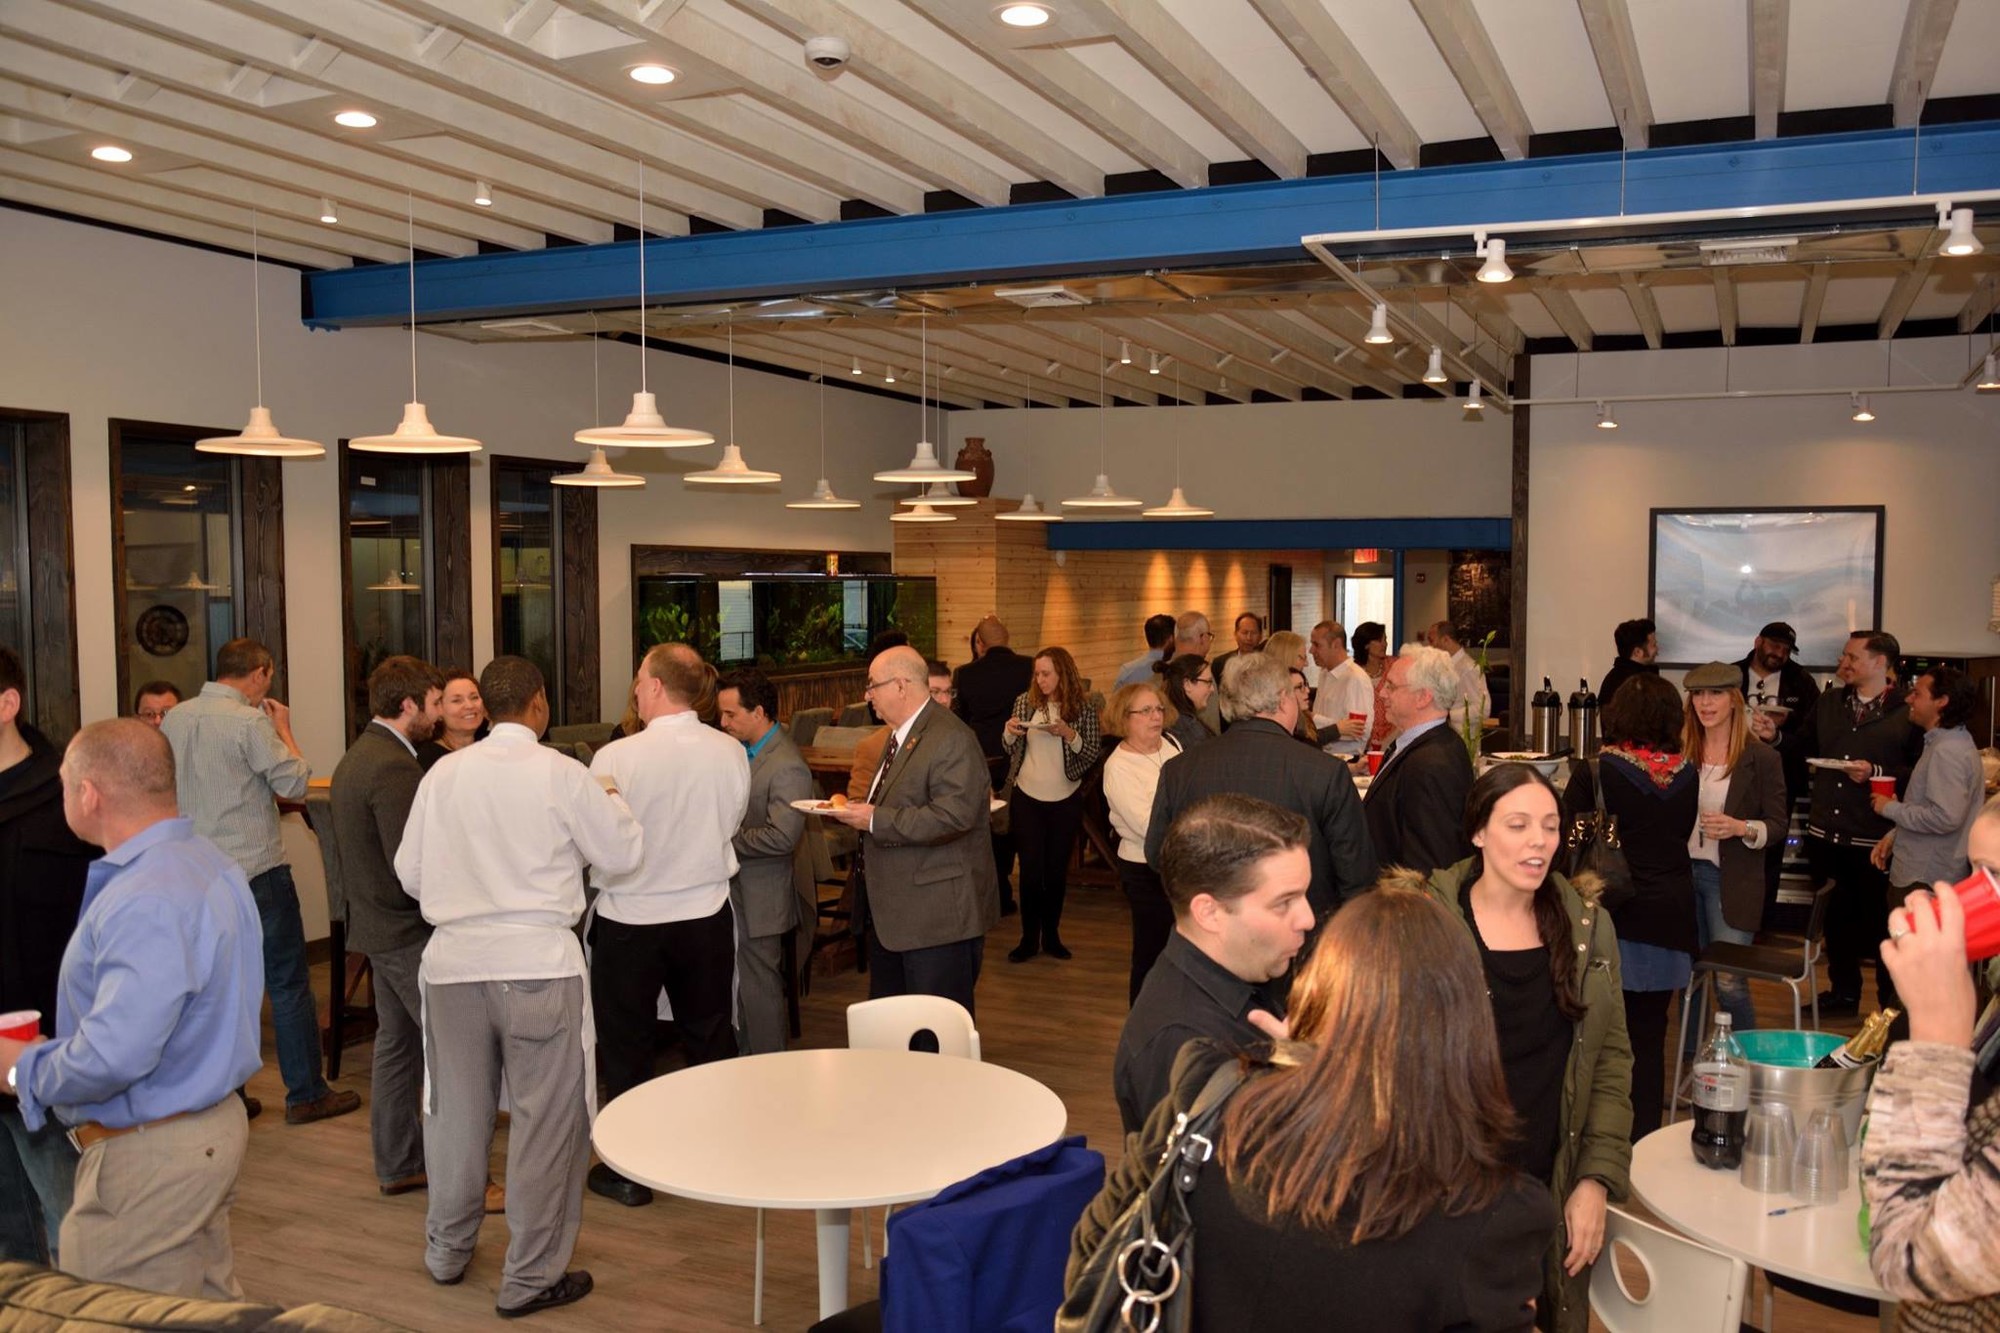 Long Beach Residents, entrepreneurs and local business attended Bridgeworks’ networking event on March 23.